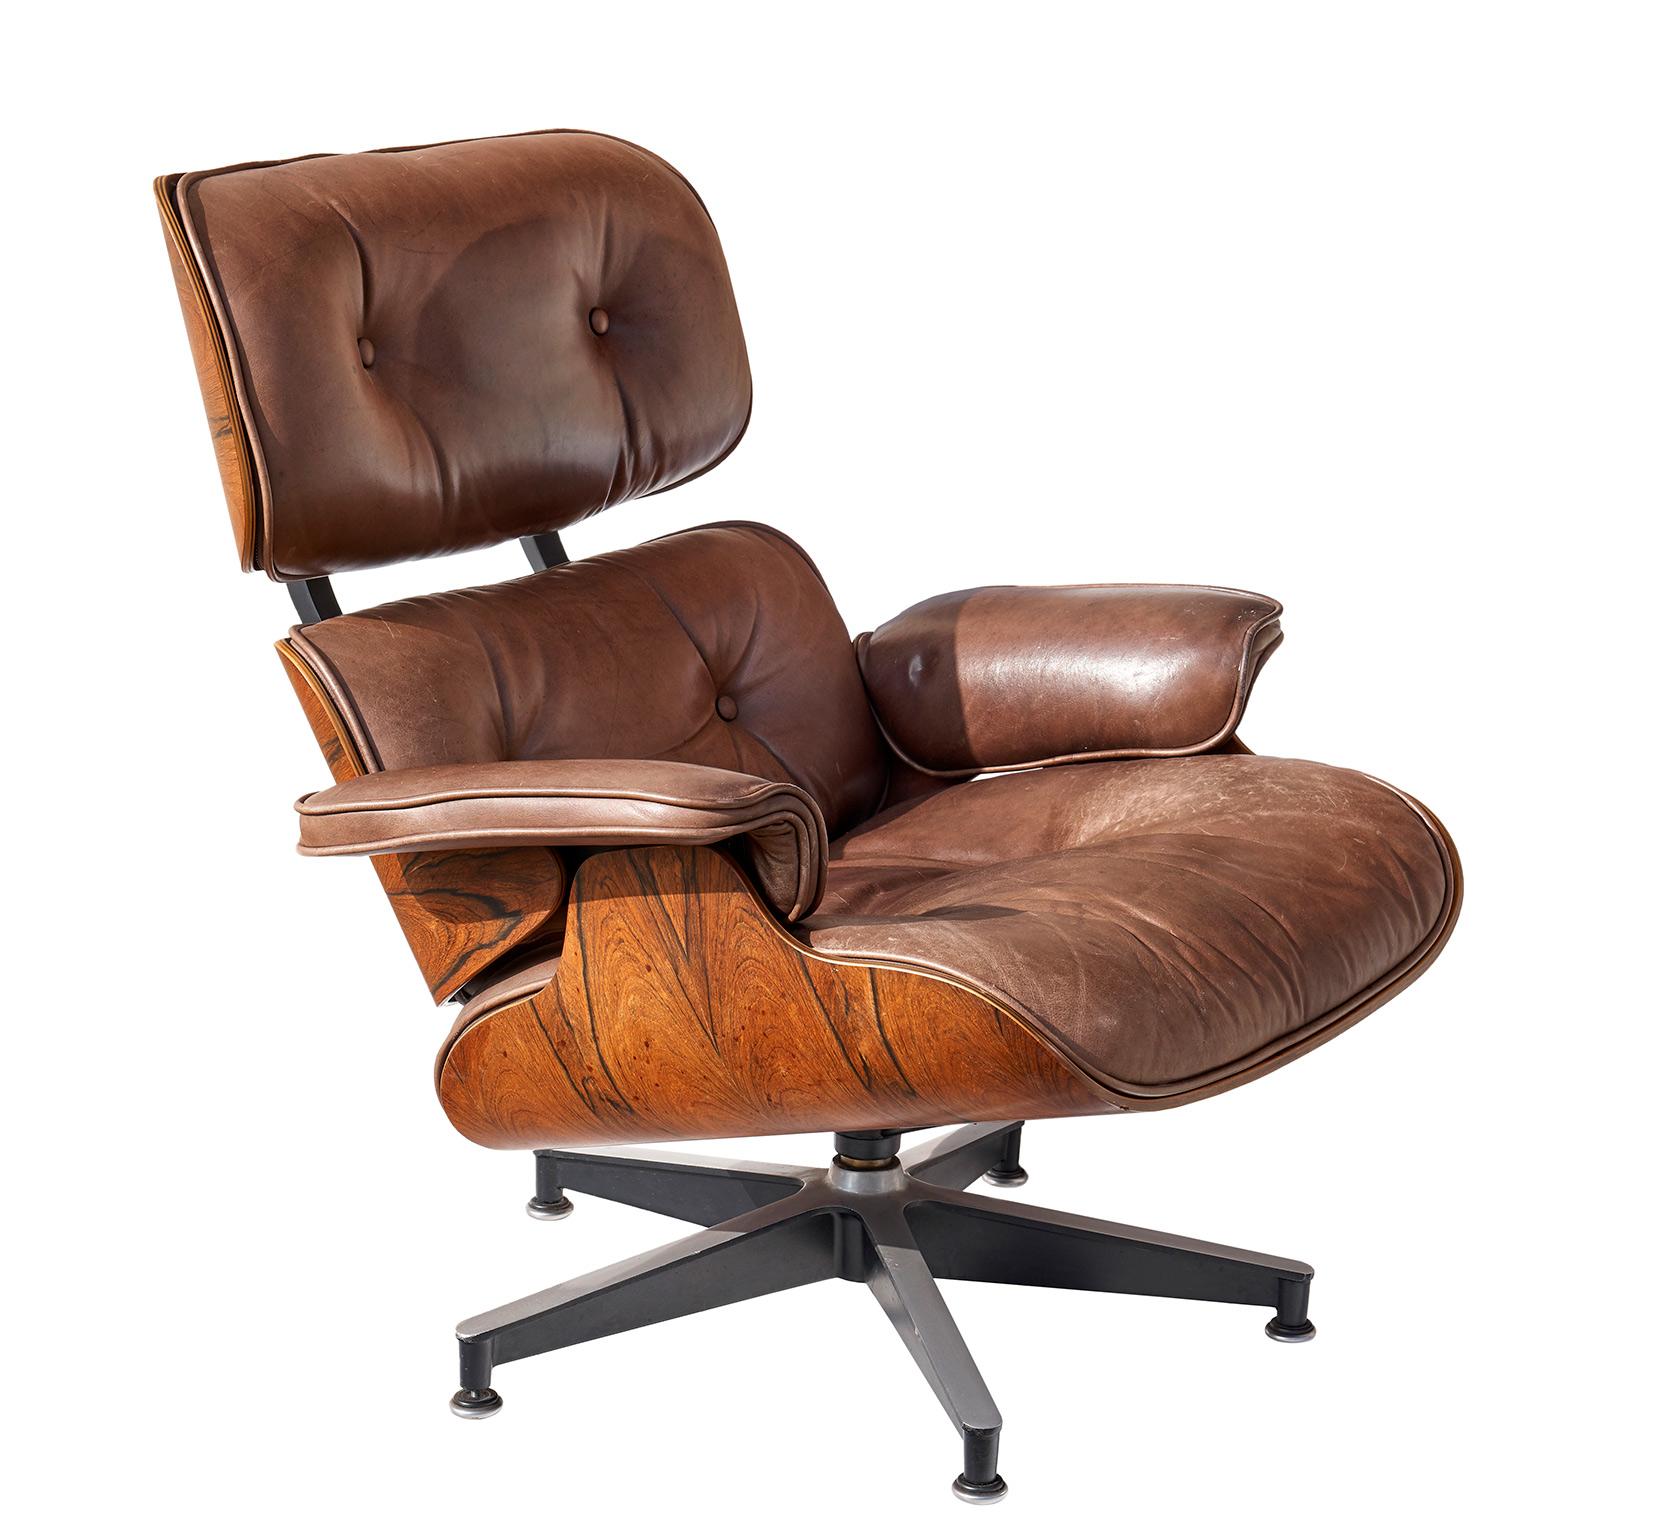 Mid-20th Century Lounge Chair and Ottoman by Charles and Ray Eames